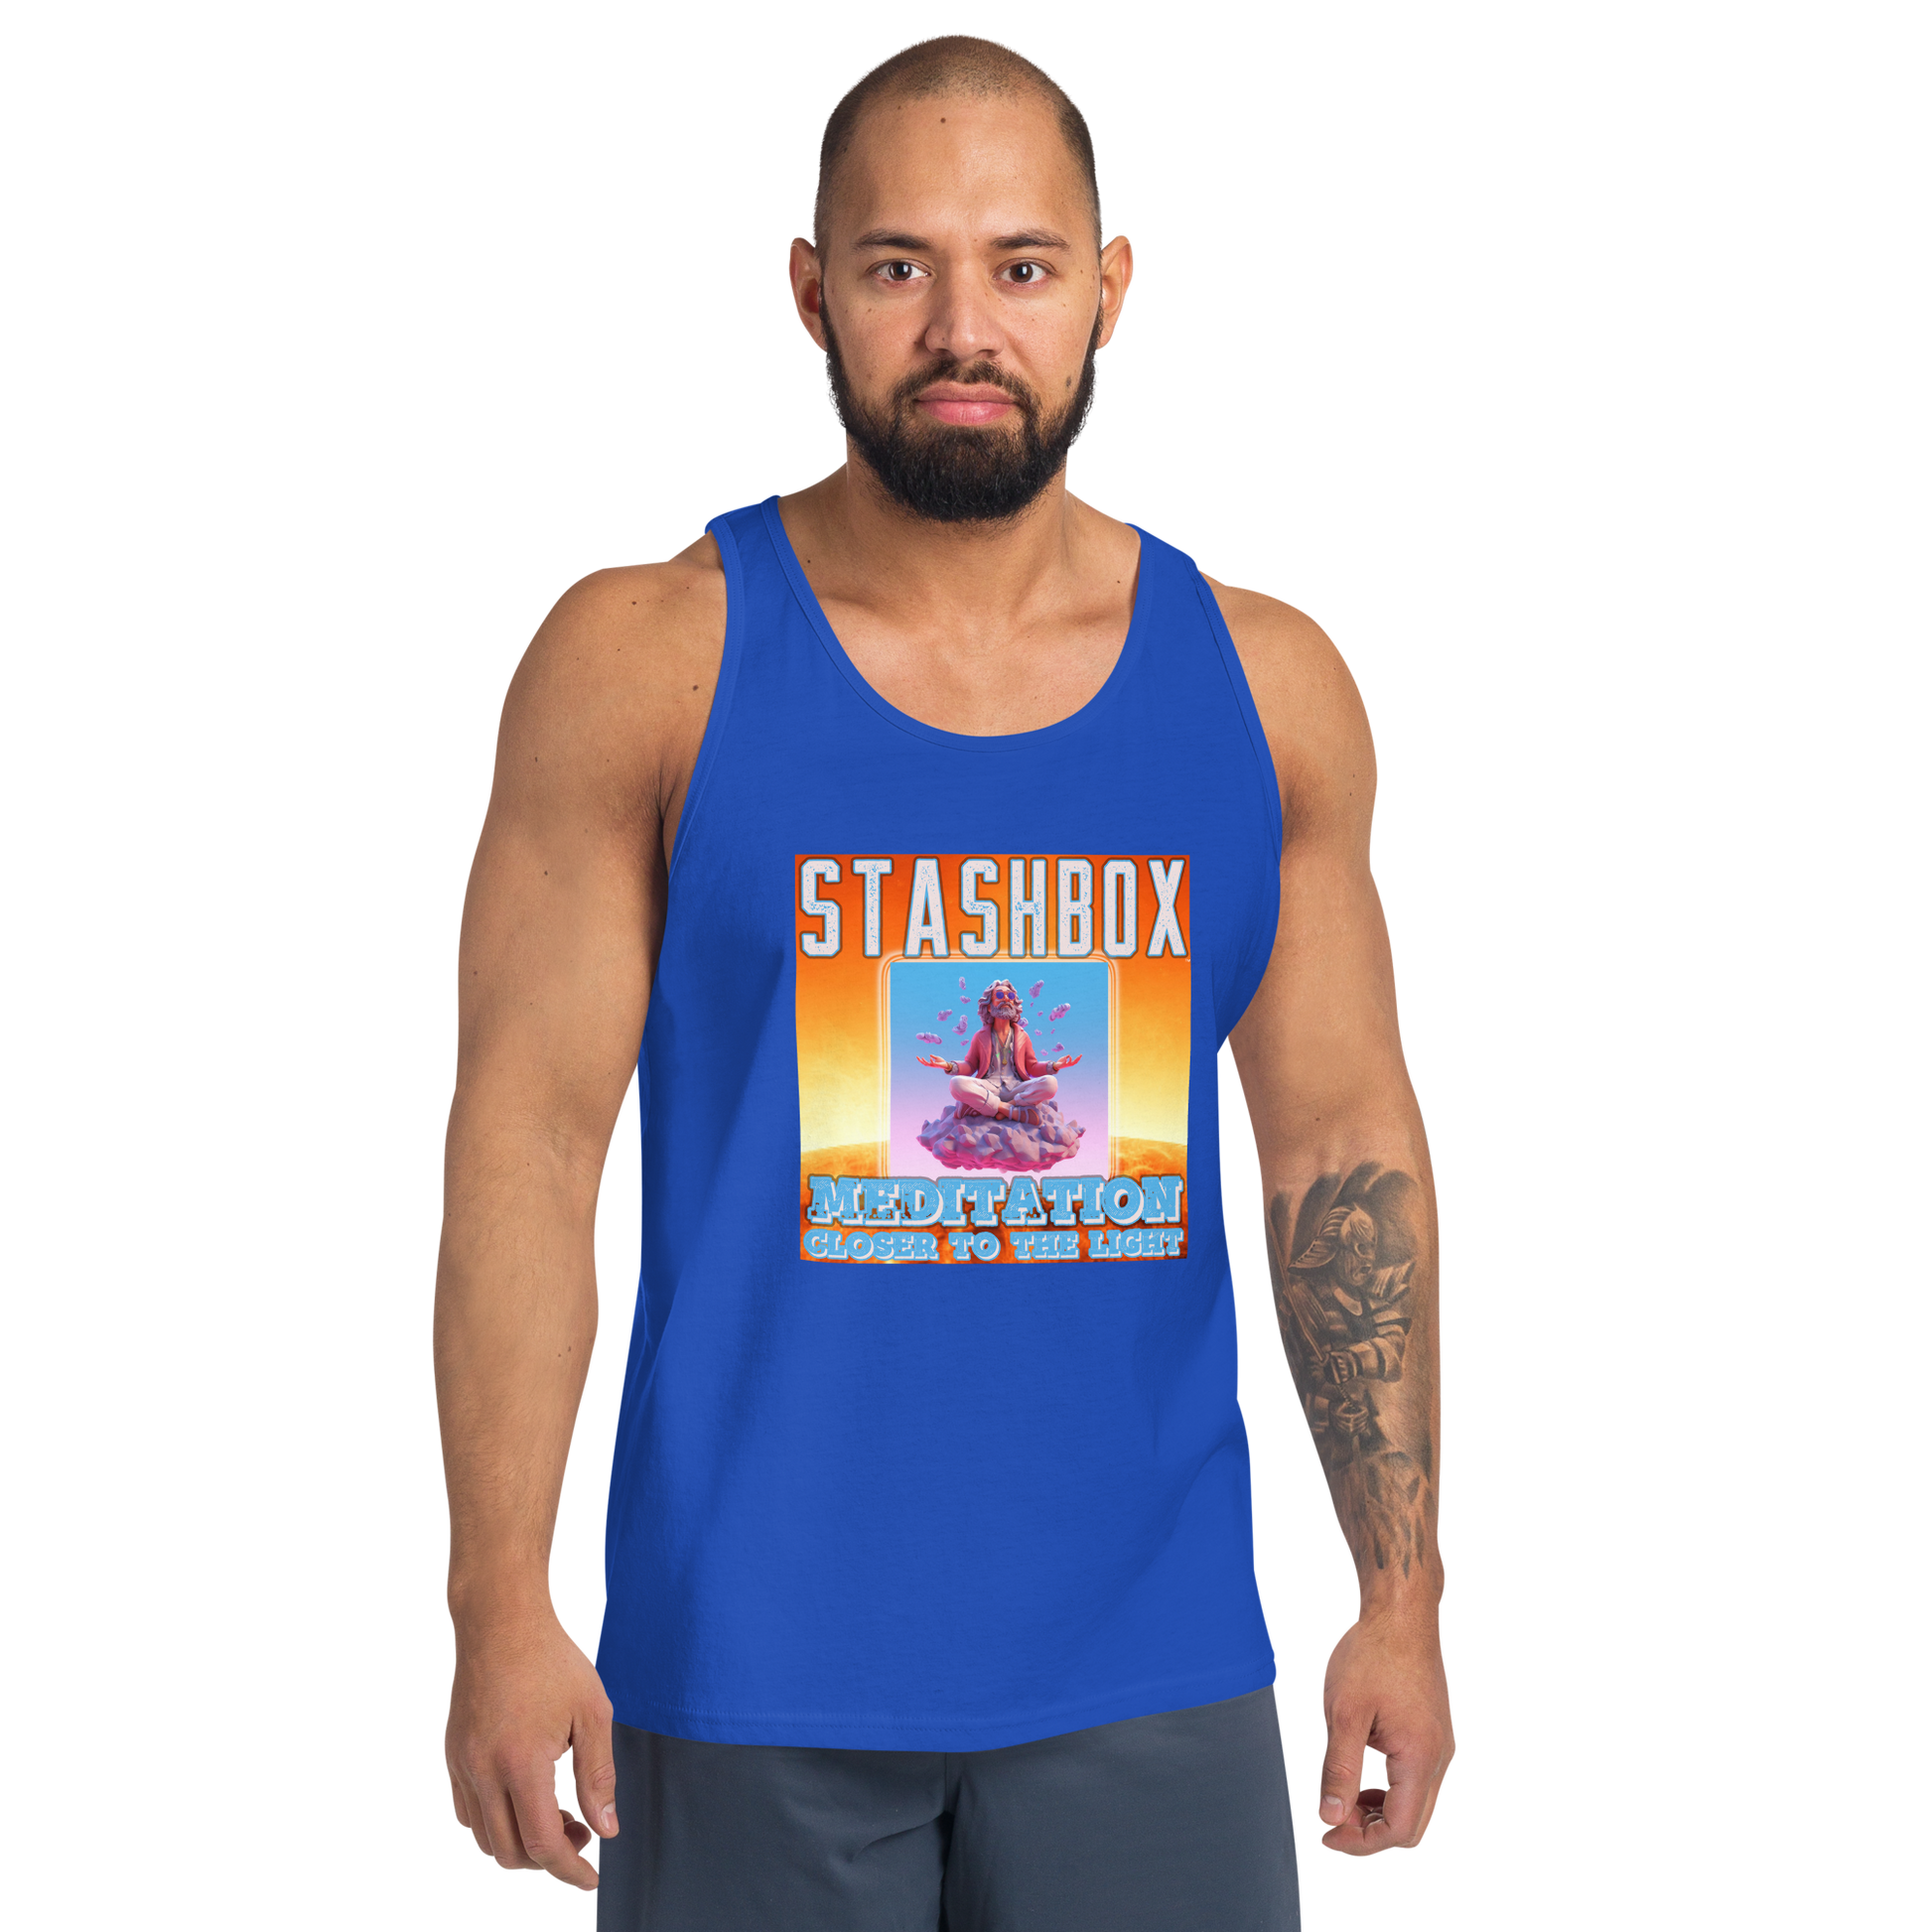 Discover serenity with our Meditation: Closer To the Light Men's Tanktop Shirt, Artwork #003 by Stashbox. Your wardrobe, your journey to mindfulness, exclusively at Stashbox.ai.